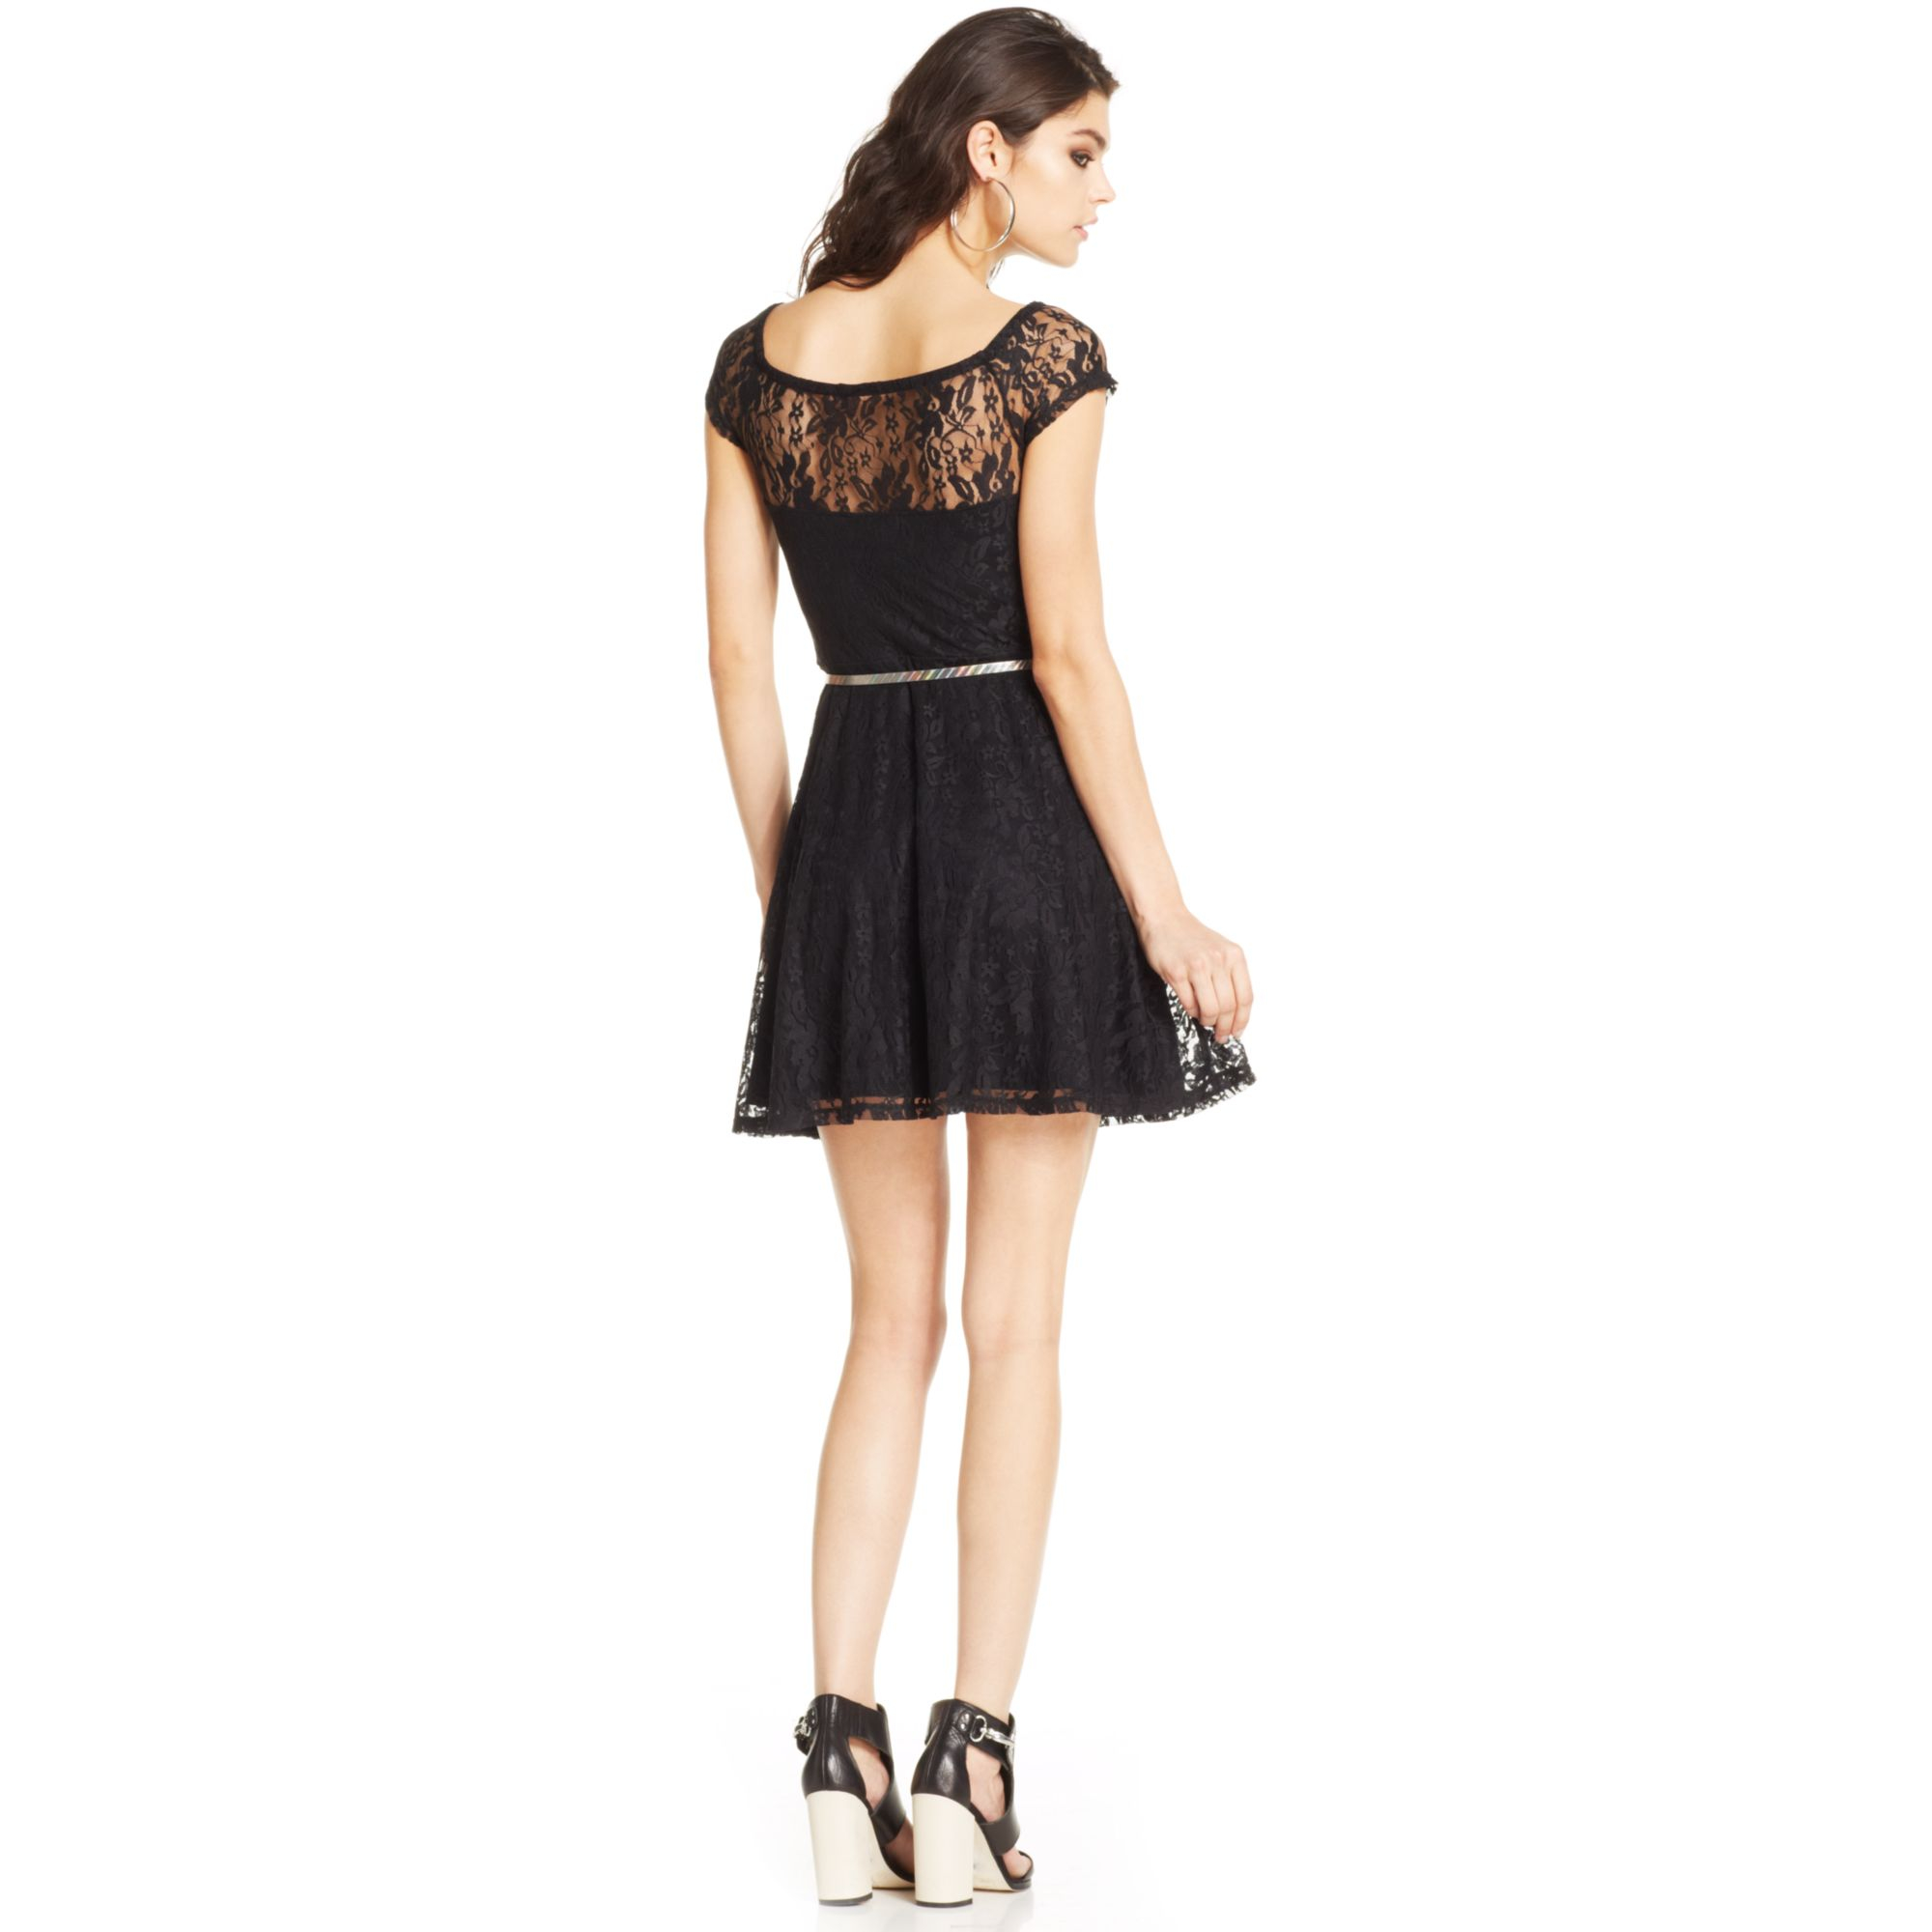 Lyst - Material Girl Juniors Lace Illusion Dress in Black